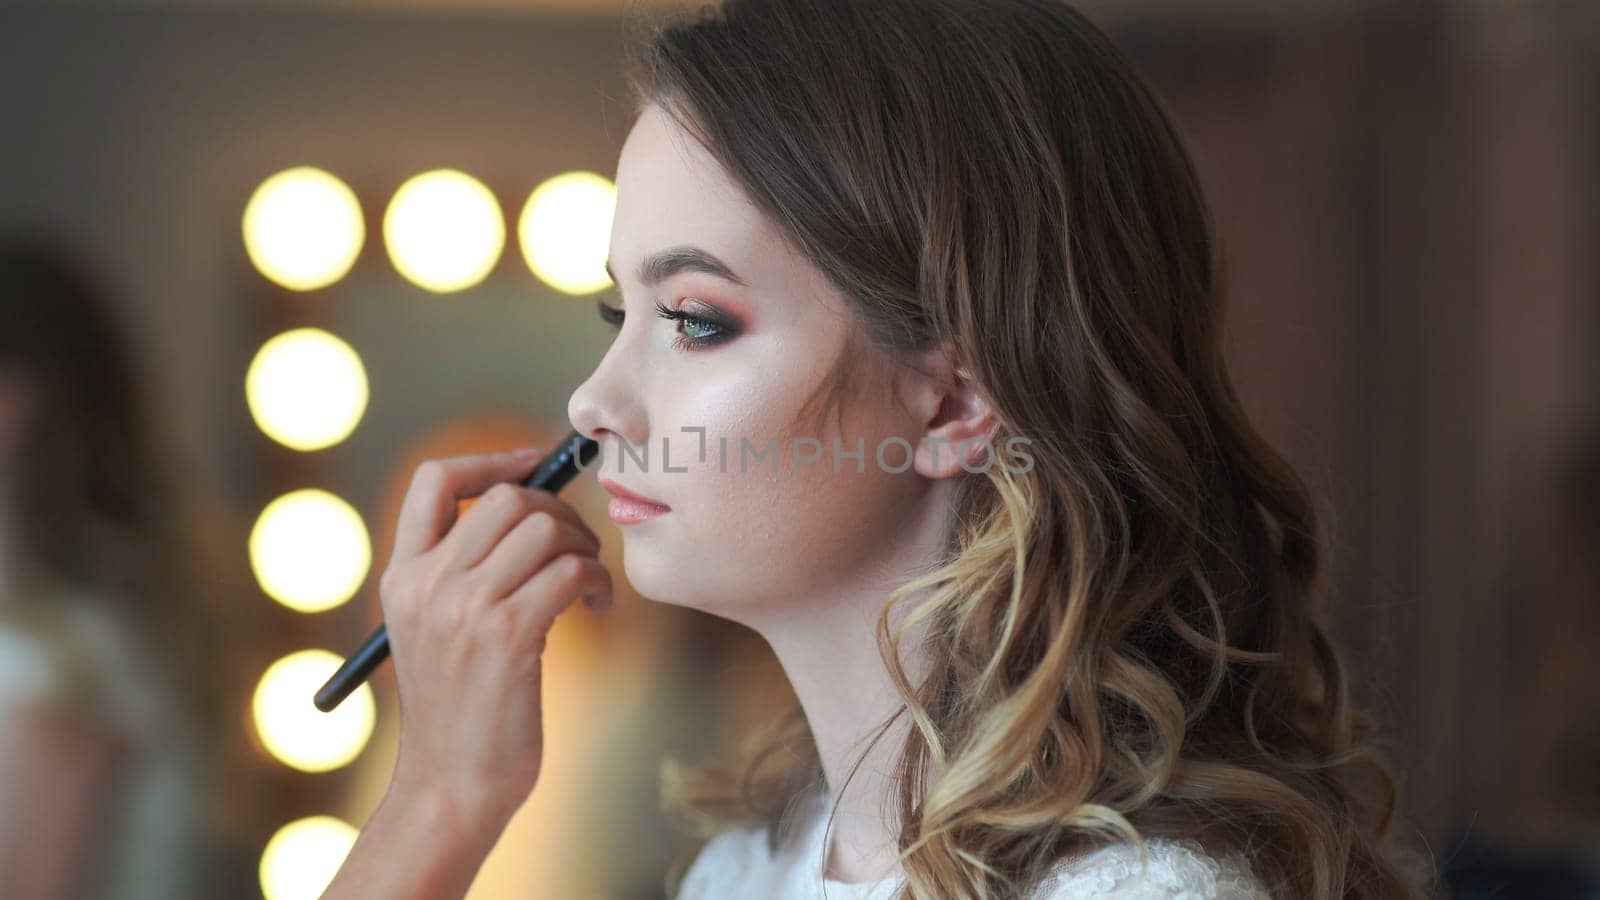 Makeup artist applies powder on the face of a 16 year old girl